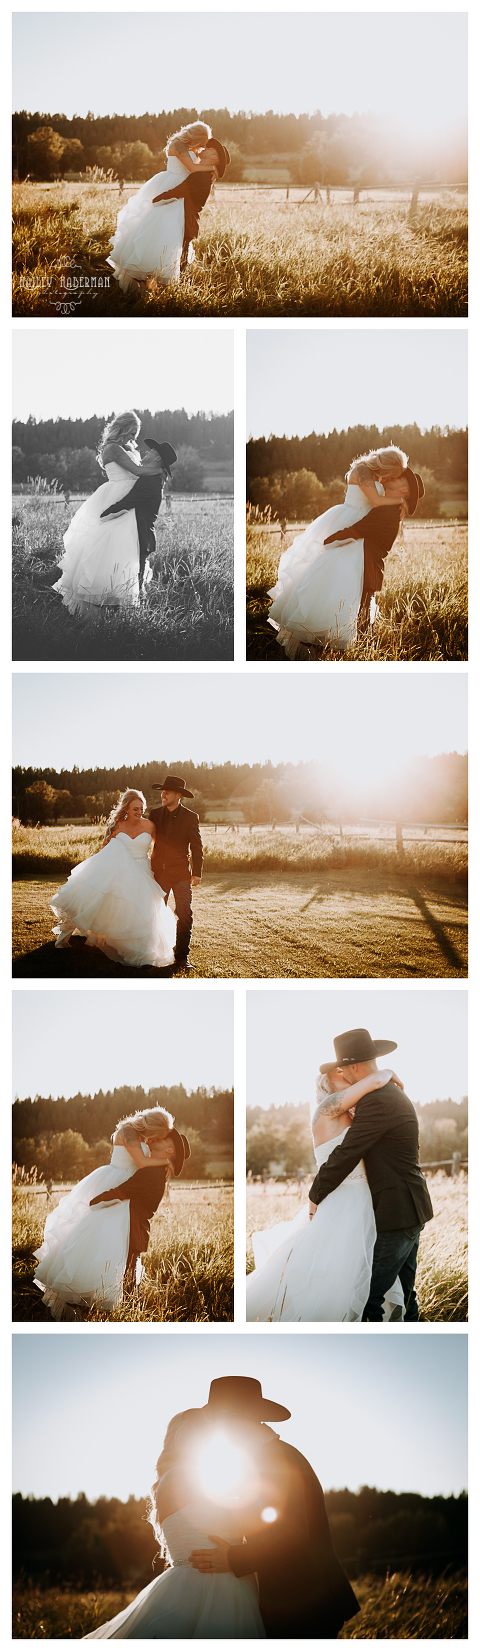 Sunset photos,Ryan and Amber married at The Cattle barn in Cle Elum, WA, photographed by Hailey Haberman Ellensburg Wedding Photographer